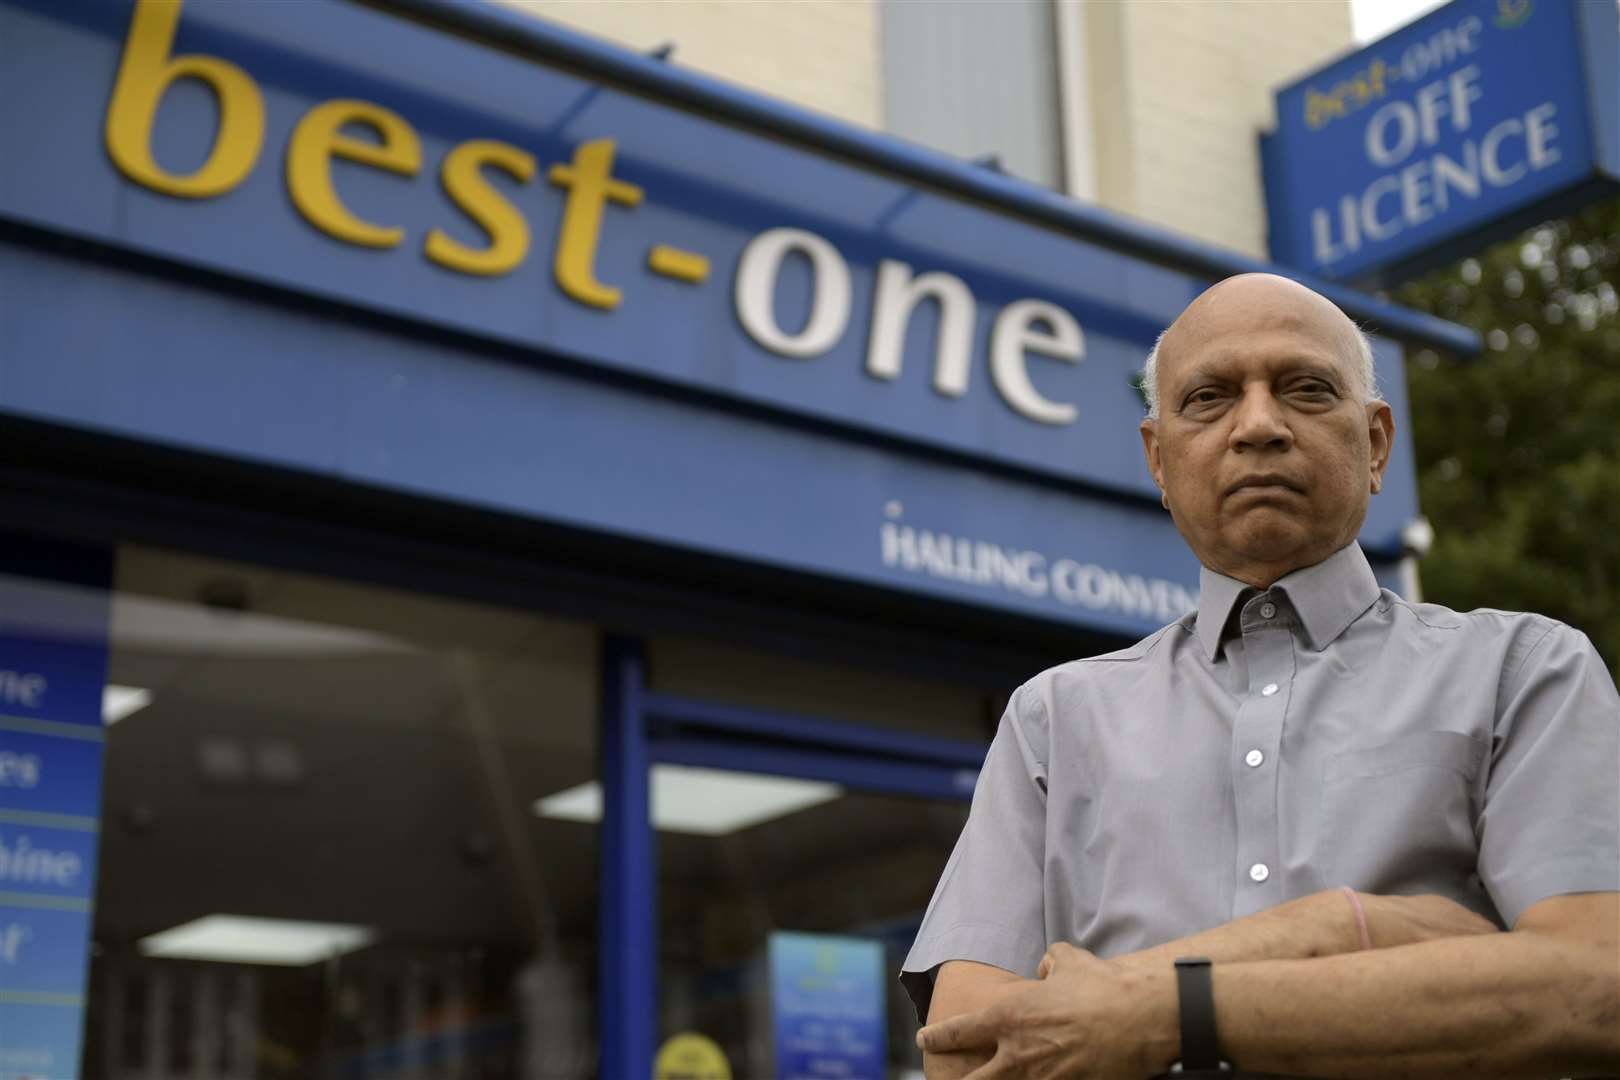 Vinay Patel outside his shop in Halling